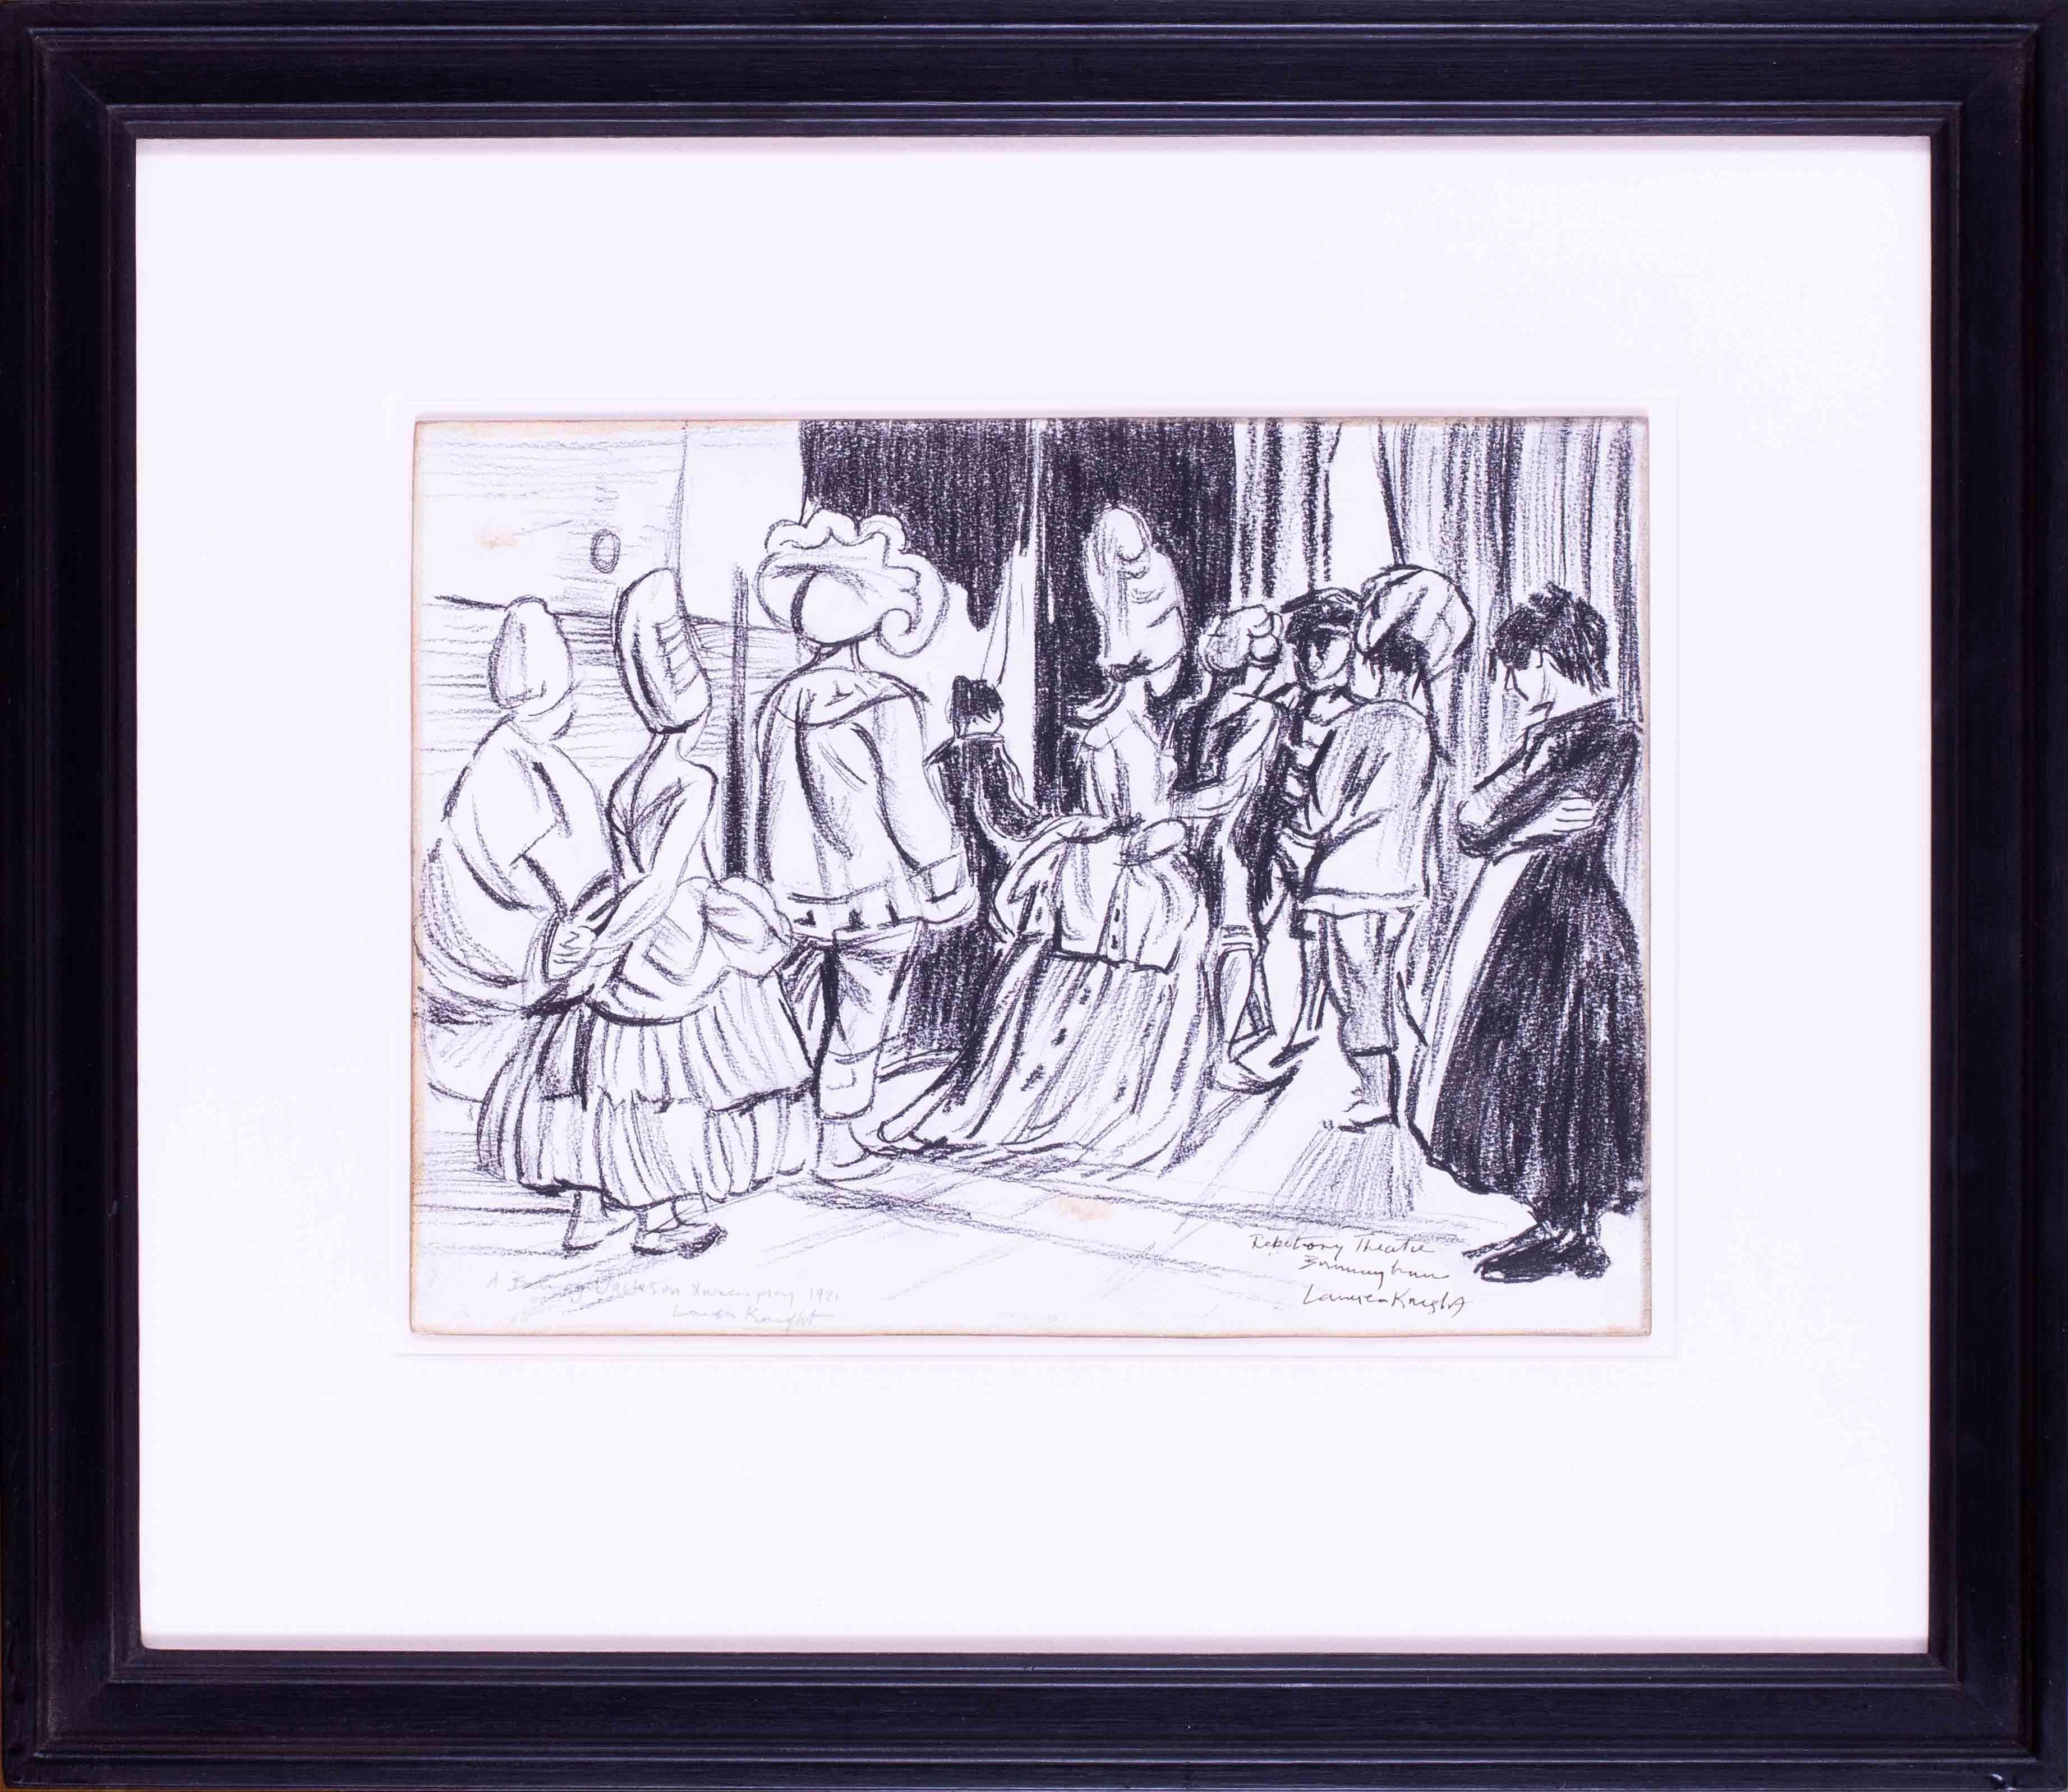 A beautifully composed drawing of 'A Barry Jackson Xmas Play' by Dame Laura Knight executed in 1921.  The work is signed and titled and is in good condition.  The full details are as follows: 

Dame Laura Knight RA RWS (British, 1877 – 1970)
A Barry